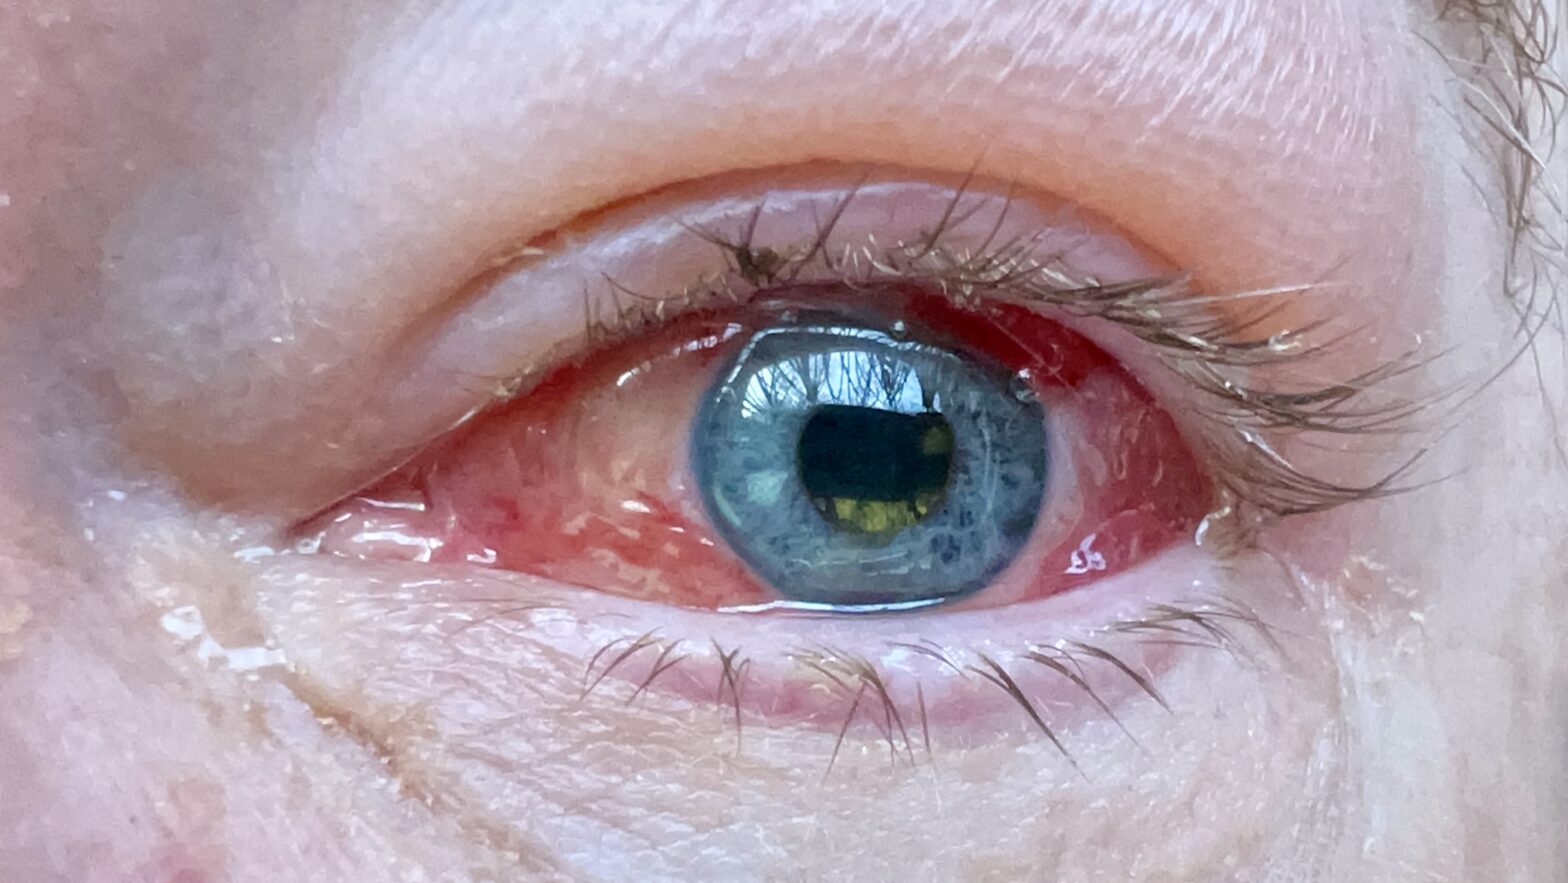 Extreme close-up of Stewart's left eye showing redness and dilated pupil.